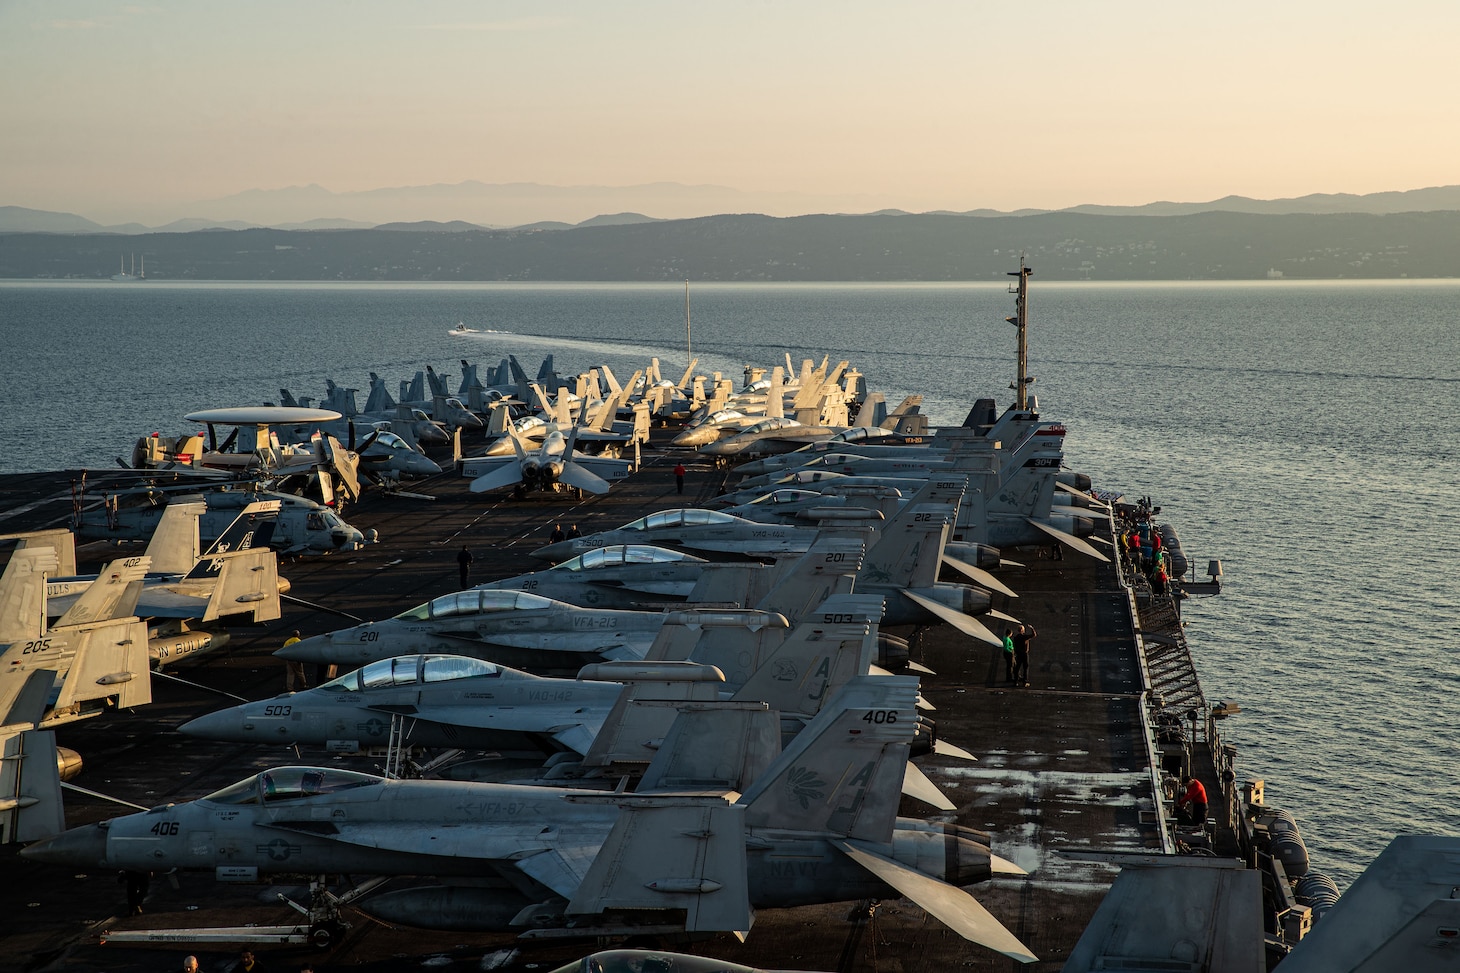 The World’s Largest Aircraft Carrier Arrives in Trieste > United States Navy > News Stories